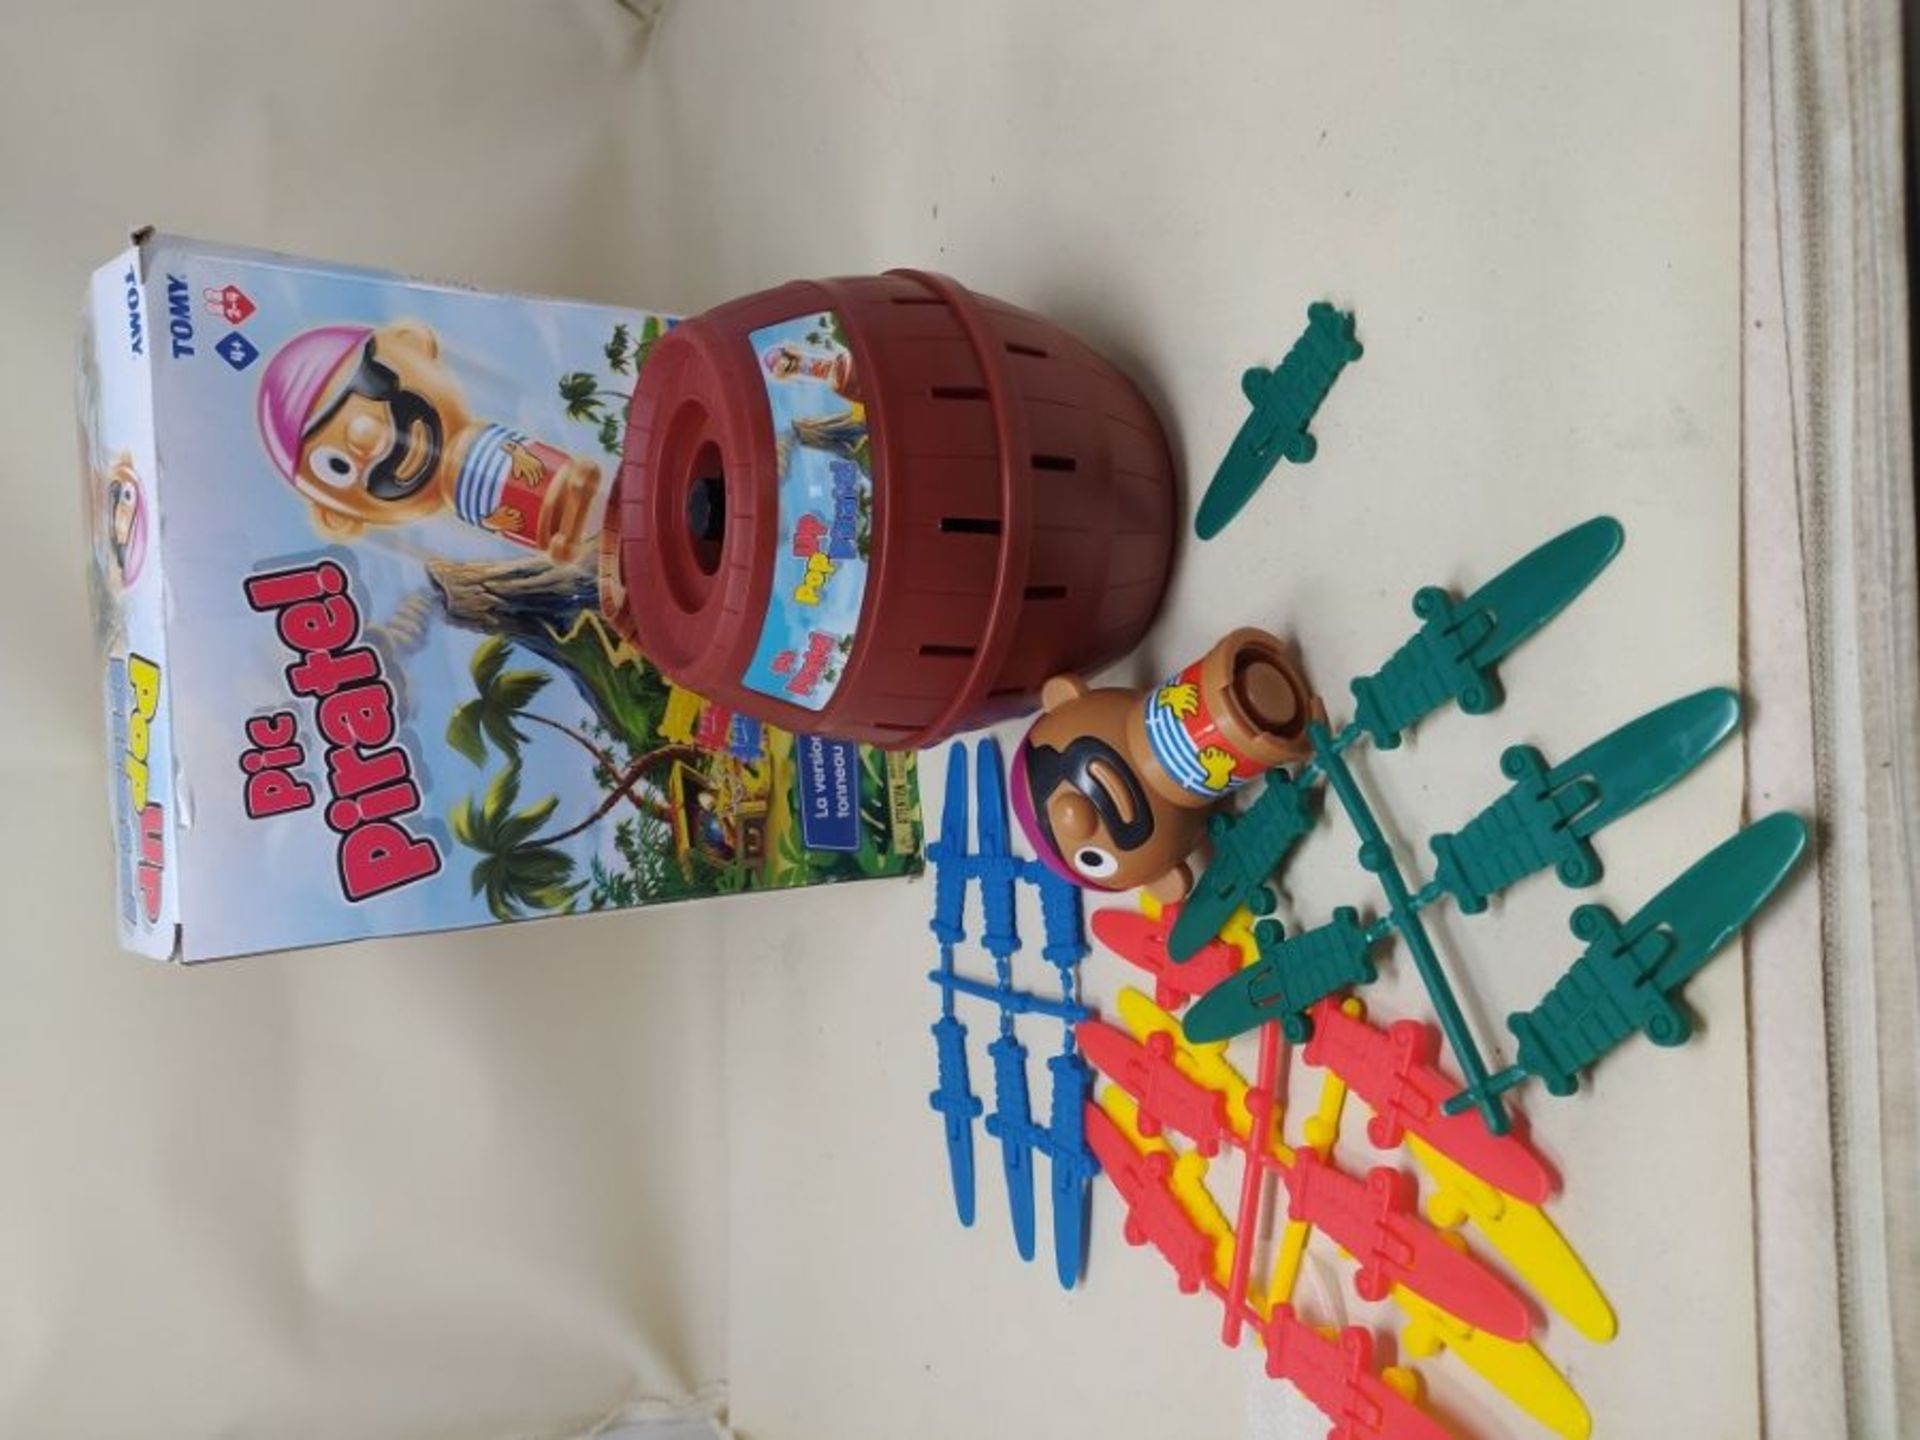 TOMY Games T7028 TOMY Pop Up Pirate Classic Children's Action Board Game Toy, Wood-Cho - Image 2 of 2